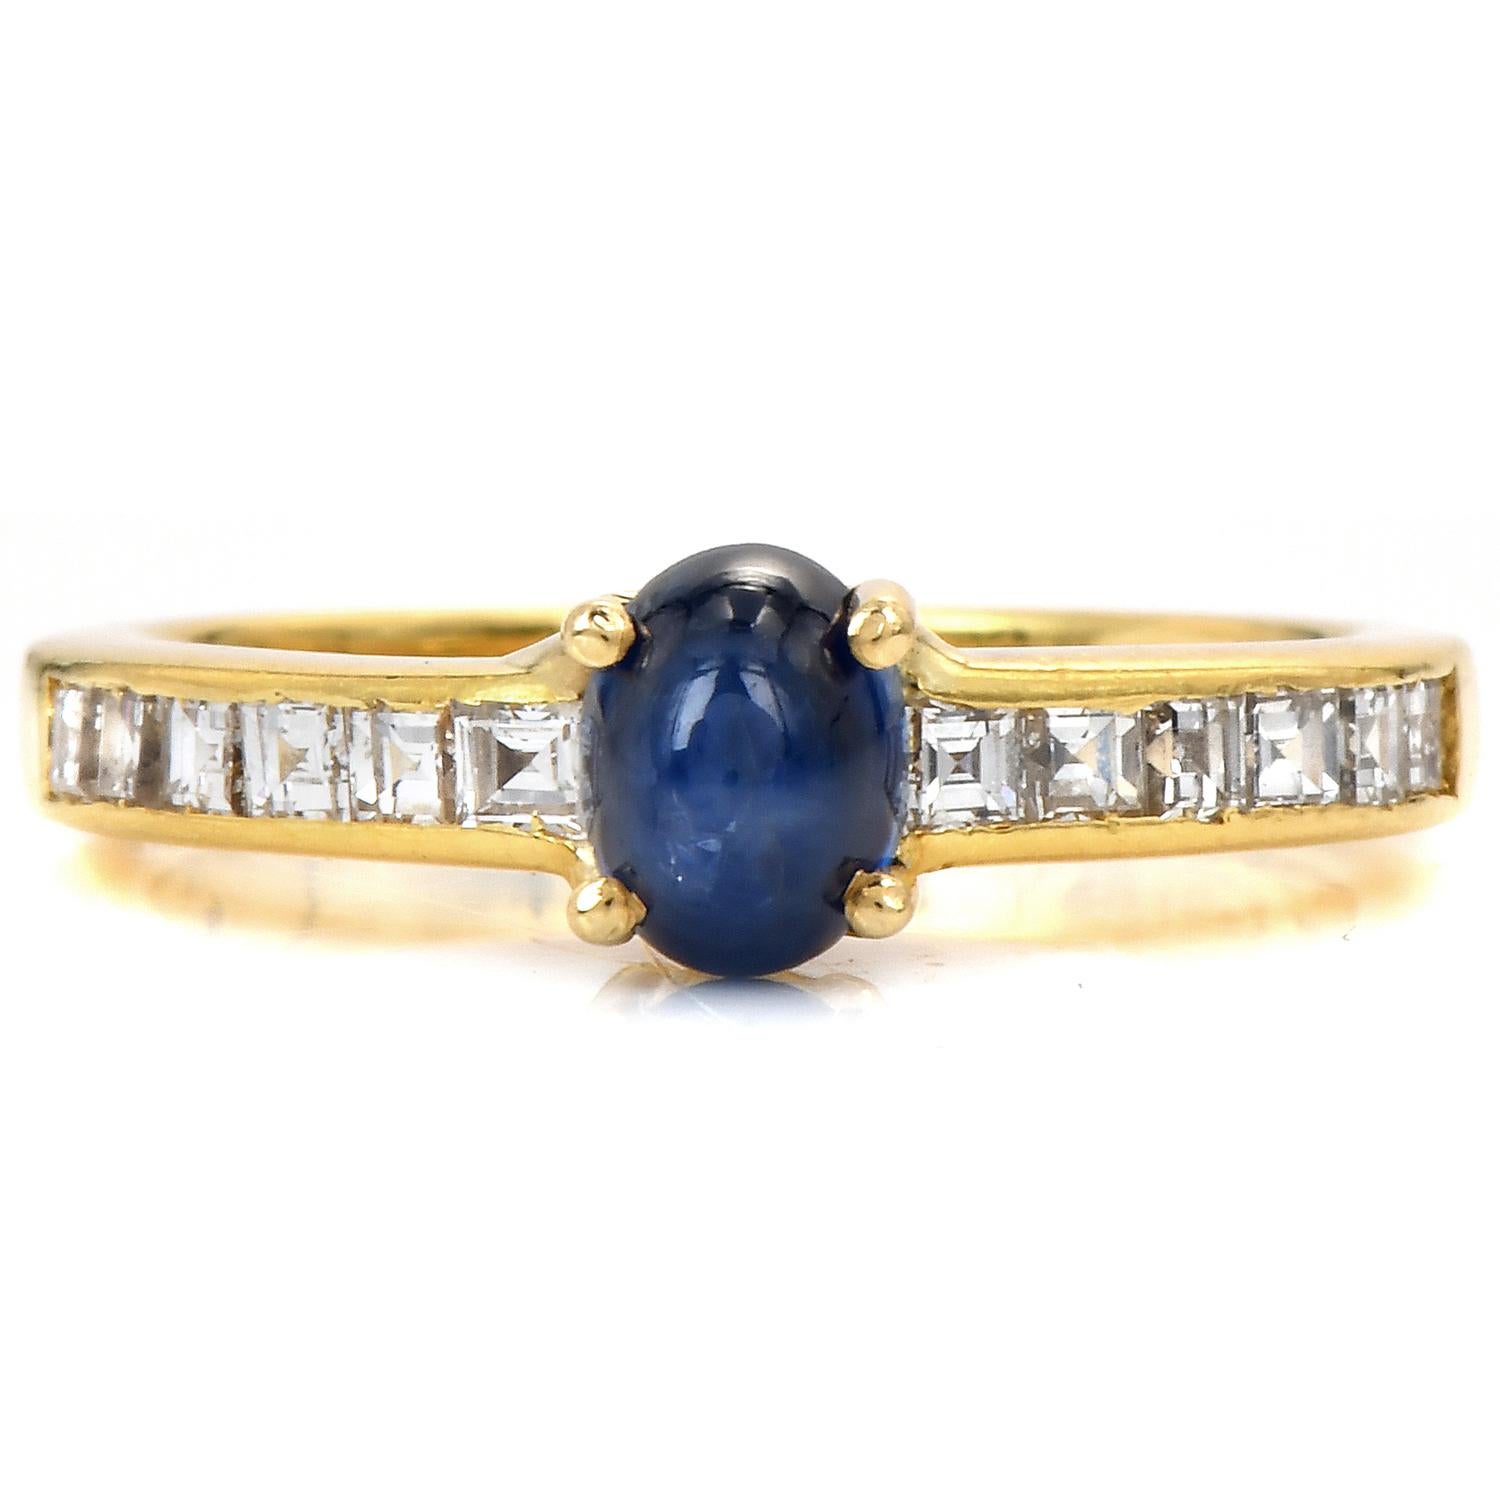 A lovely romantic Cartier's vintage ring.

Crafted in solid 18K Yellow Gold, all original.

Centered by a cabochon Genuine Blue Star Sapphire, Cabochon Oval cut, prong set, 1.00 carats.

Bringing life to the piece, are 12 Square Asscher-Cut, channel